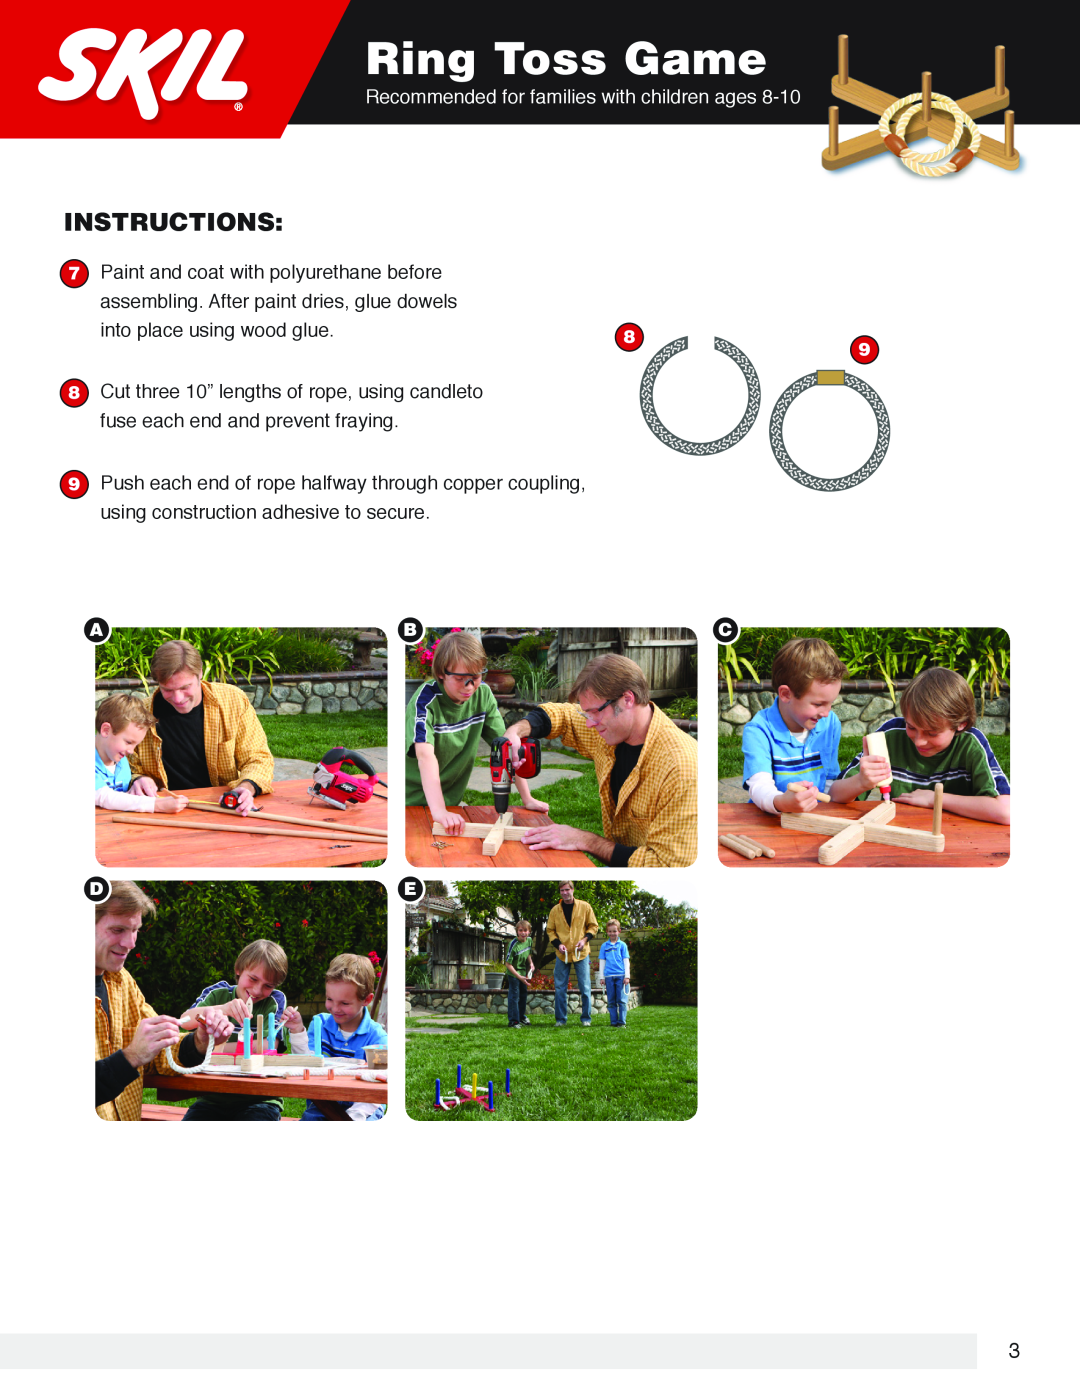 Skil Games Ring Toss Game, Instructions, Recommended for families with children ages, into place using wood glue, Abc De 